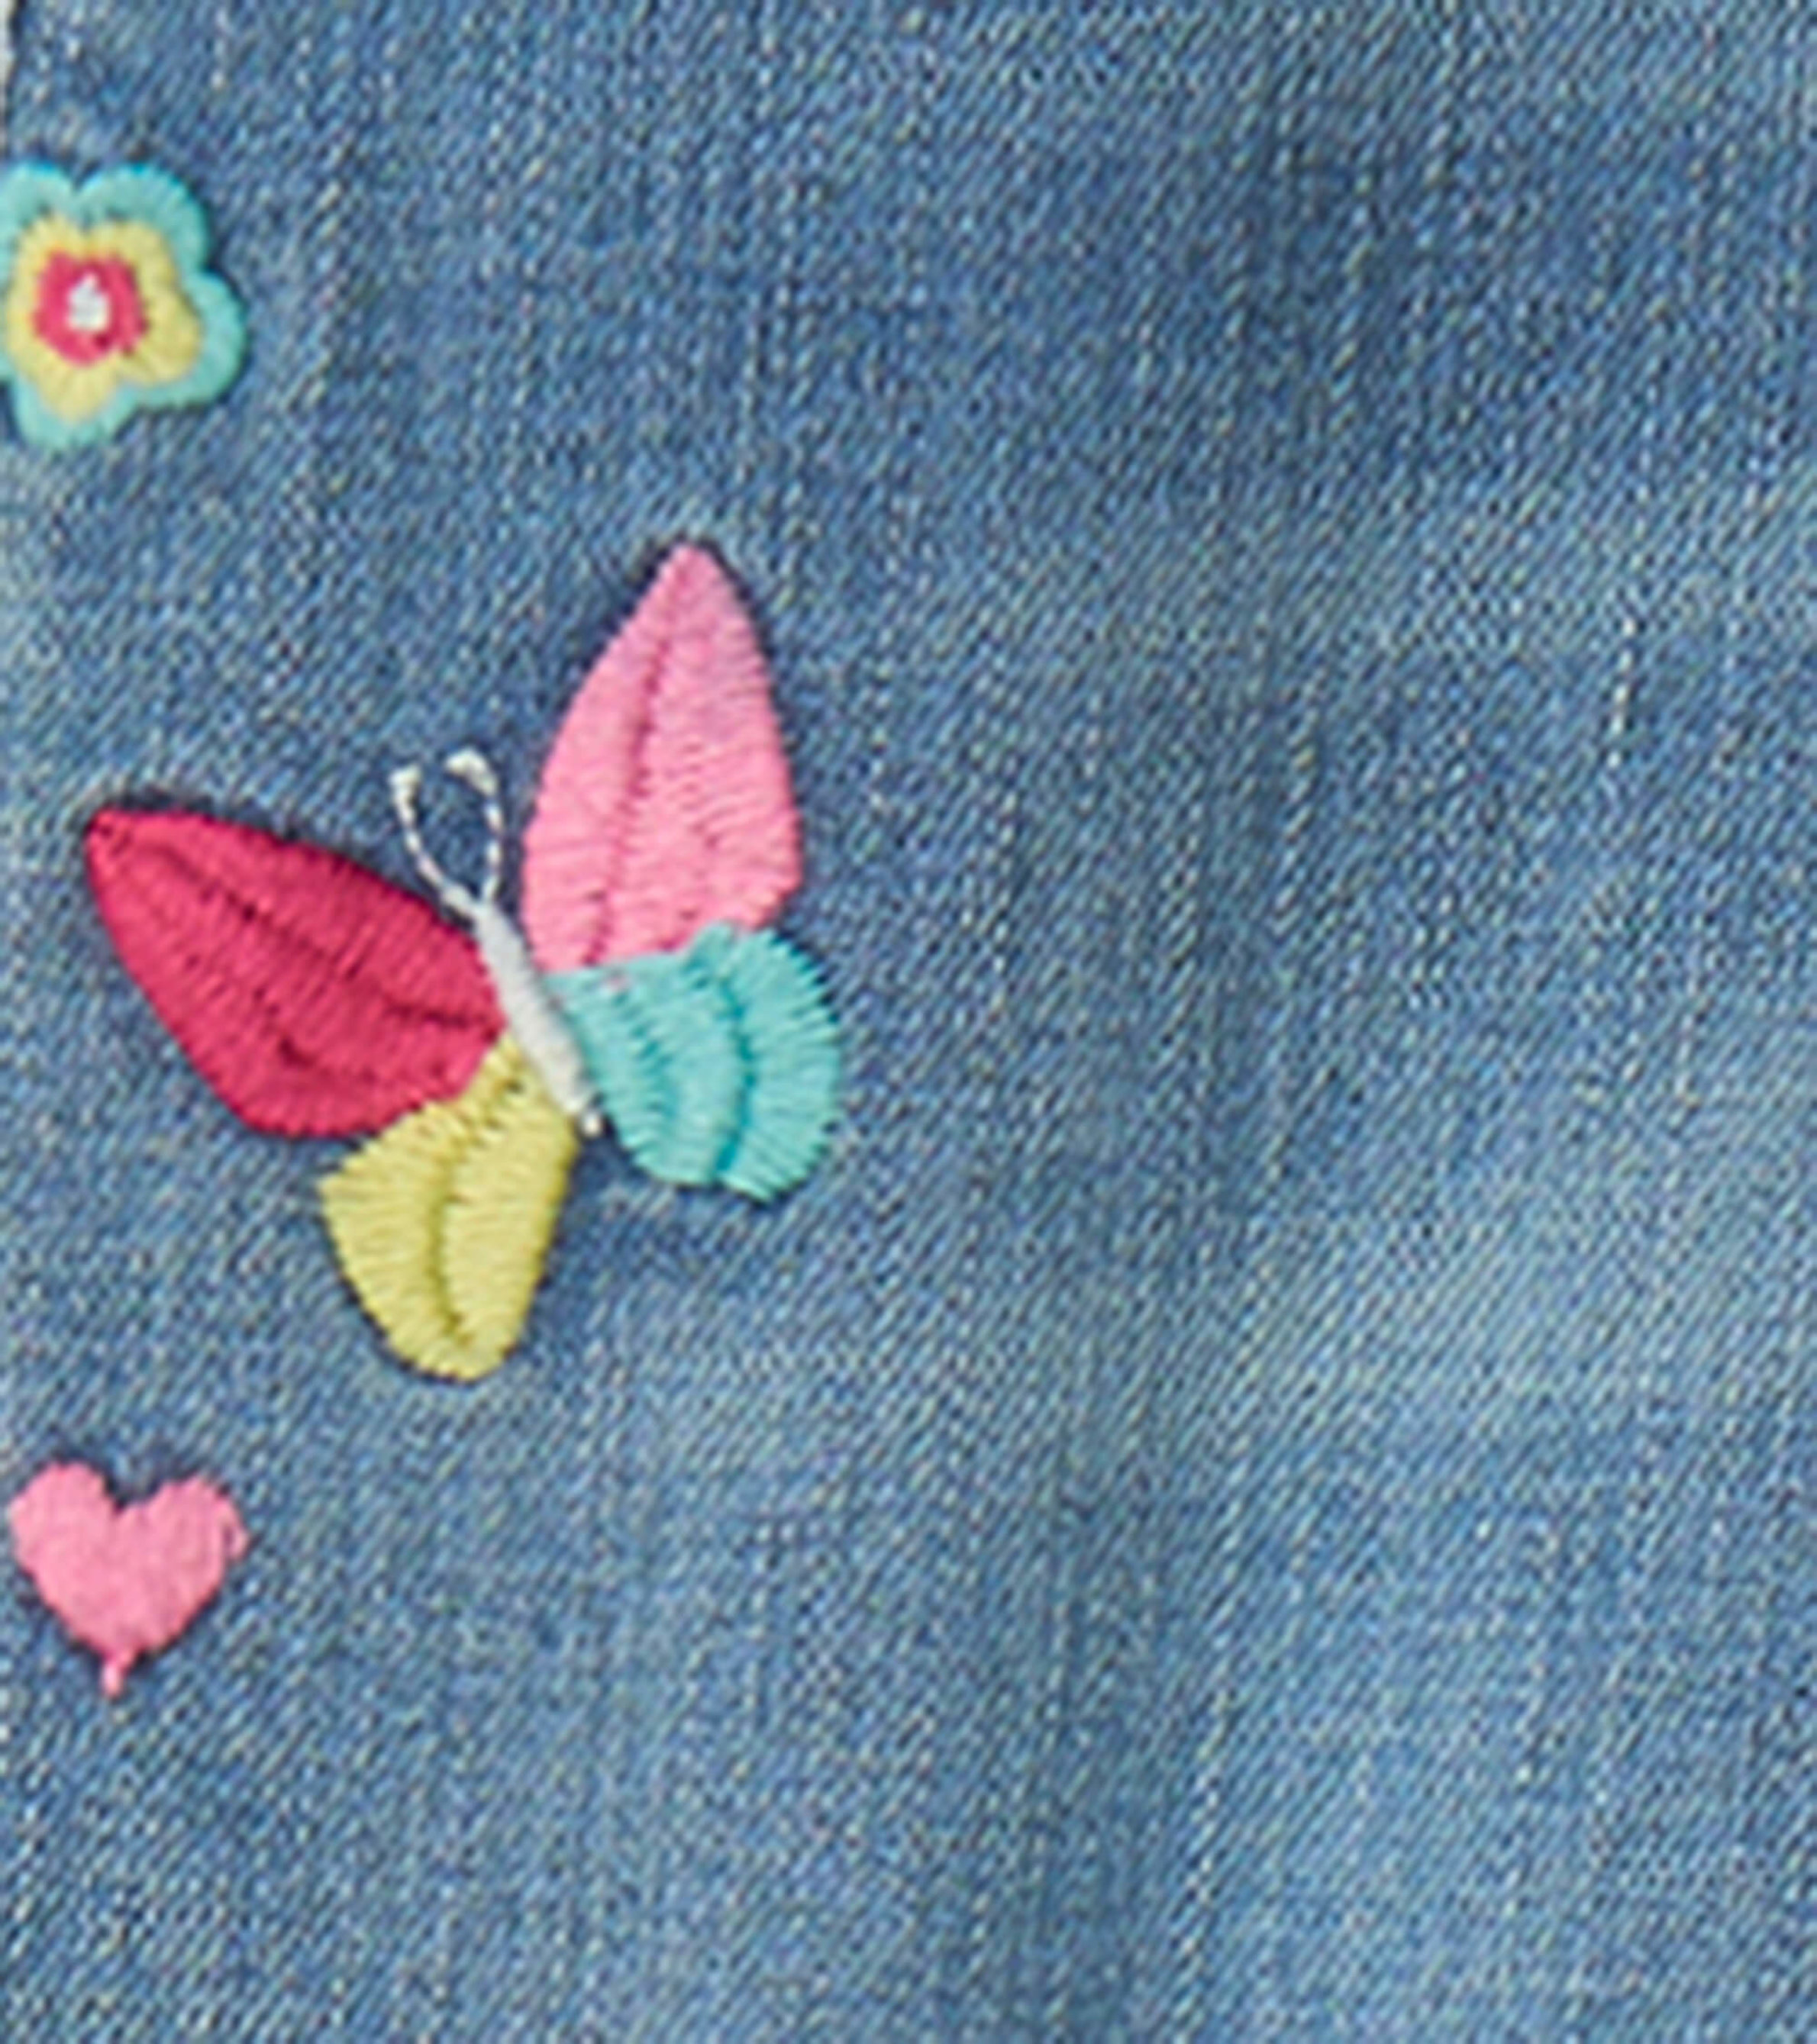 Butterfly Embroidery Jeans